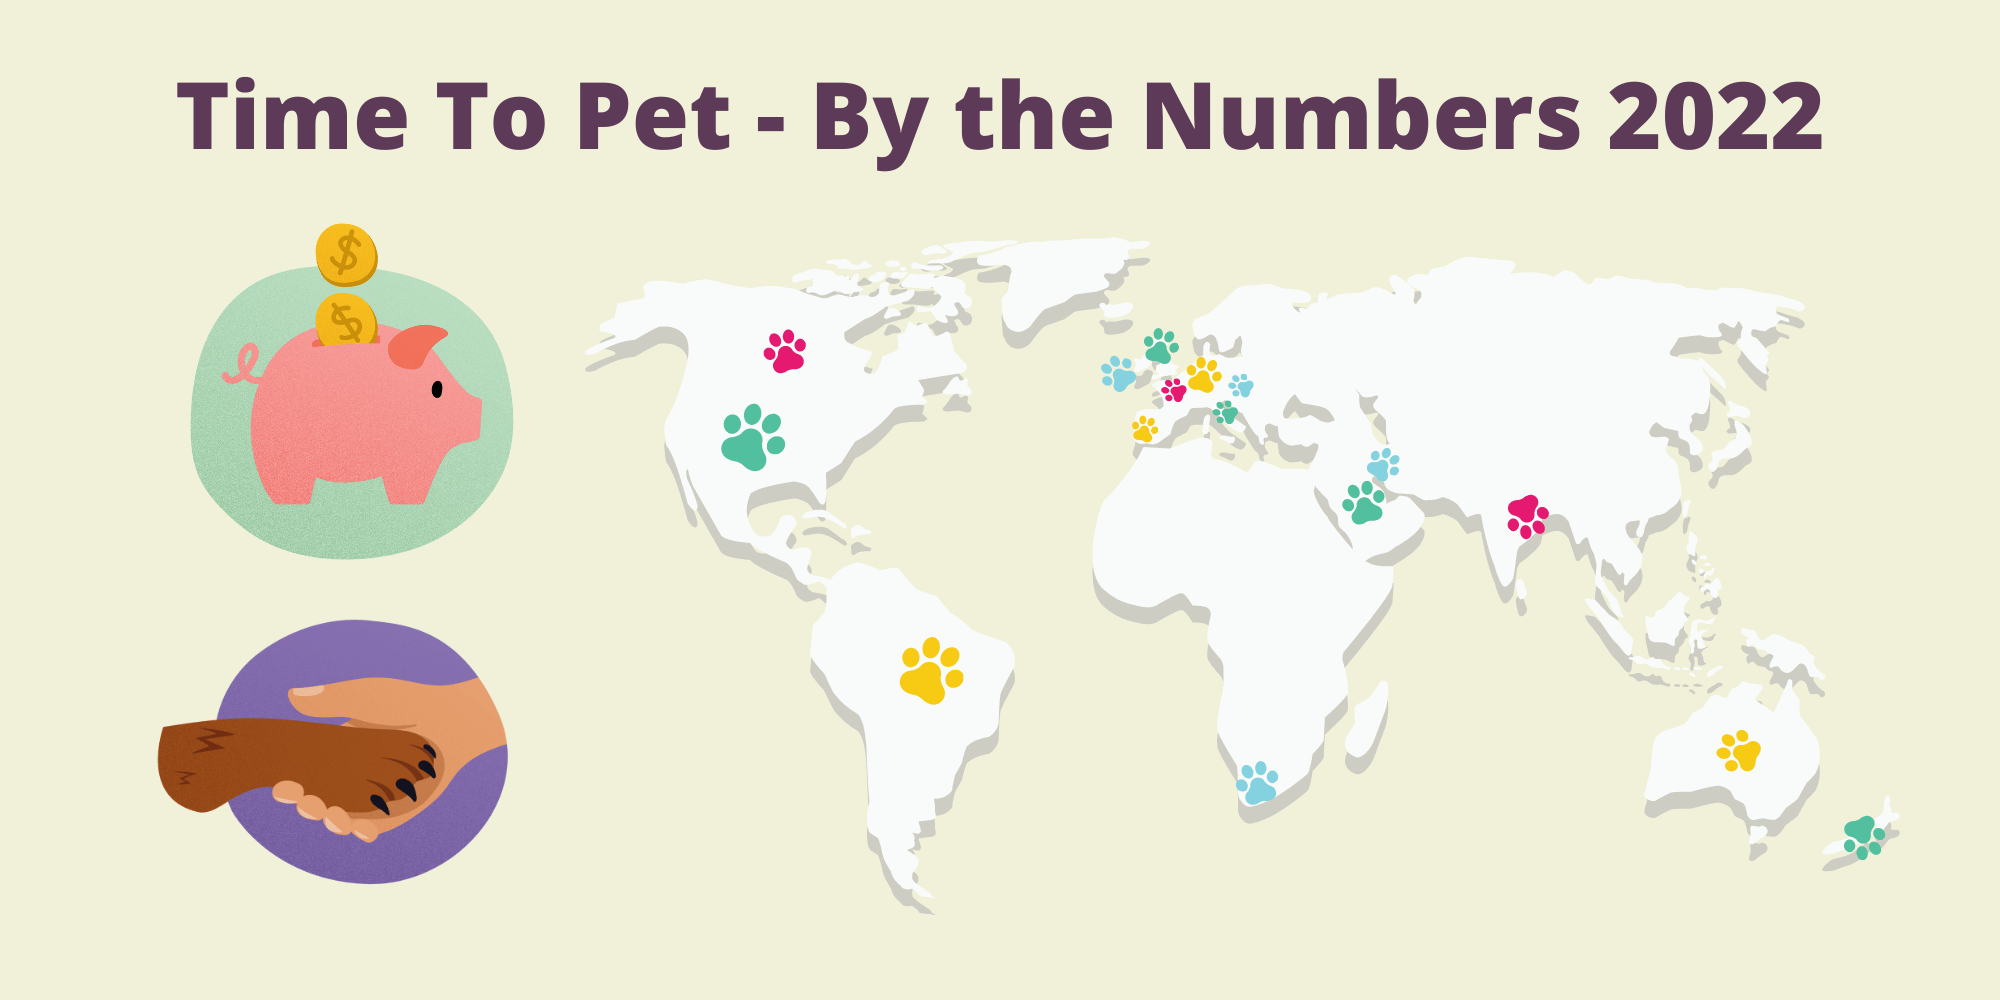 Time To Pet By The Numbers 2022 Summary Image.png